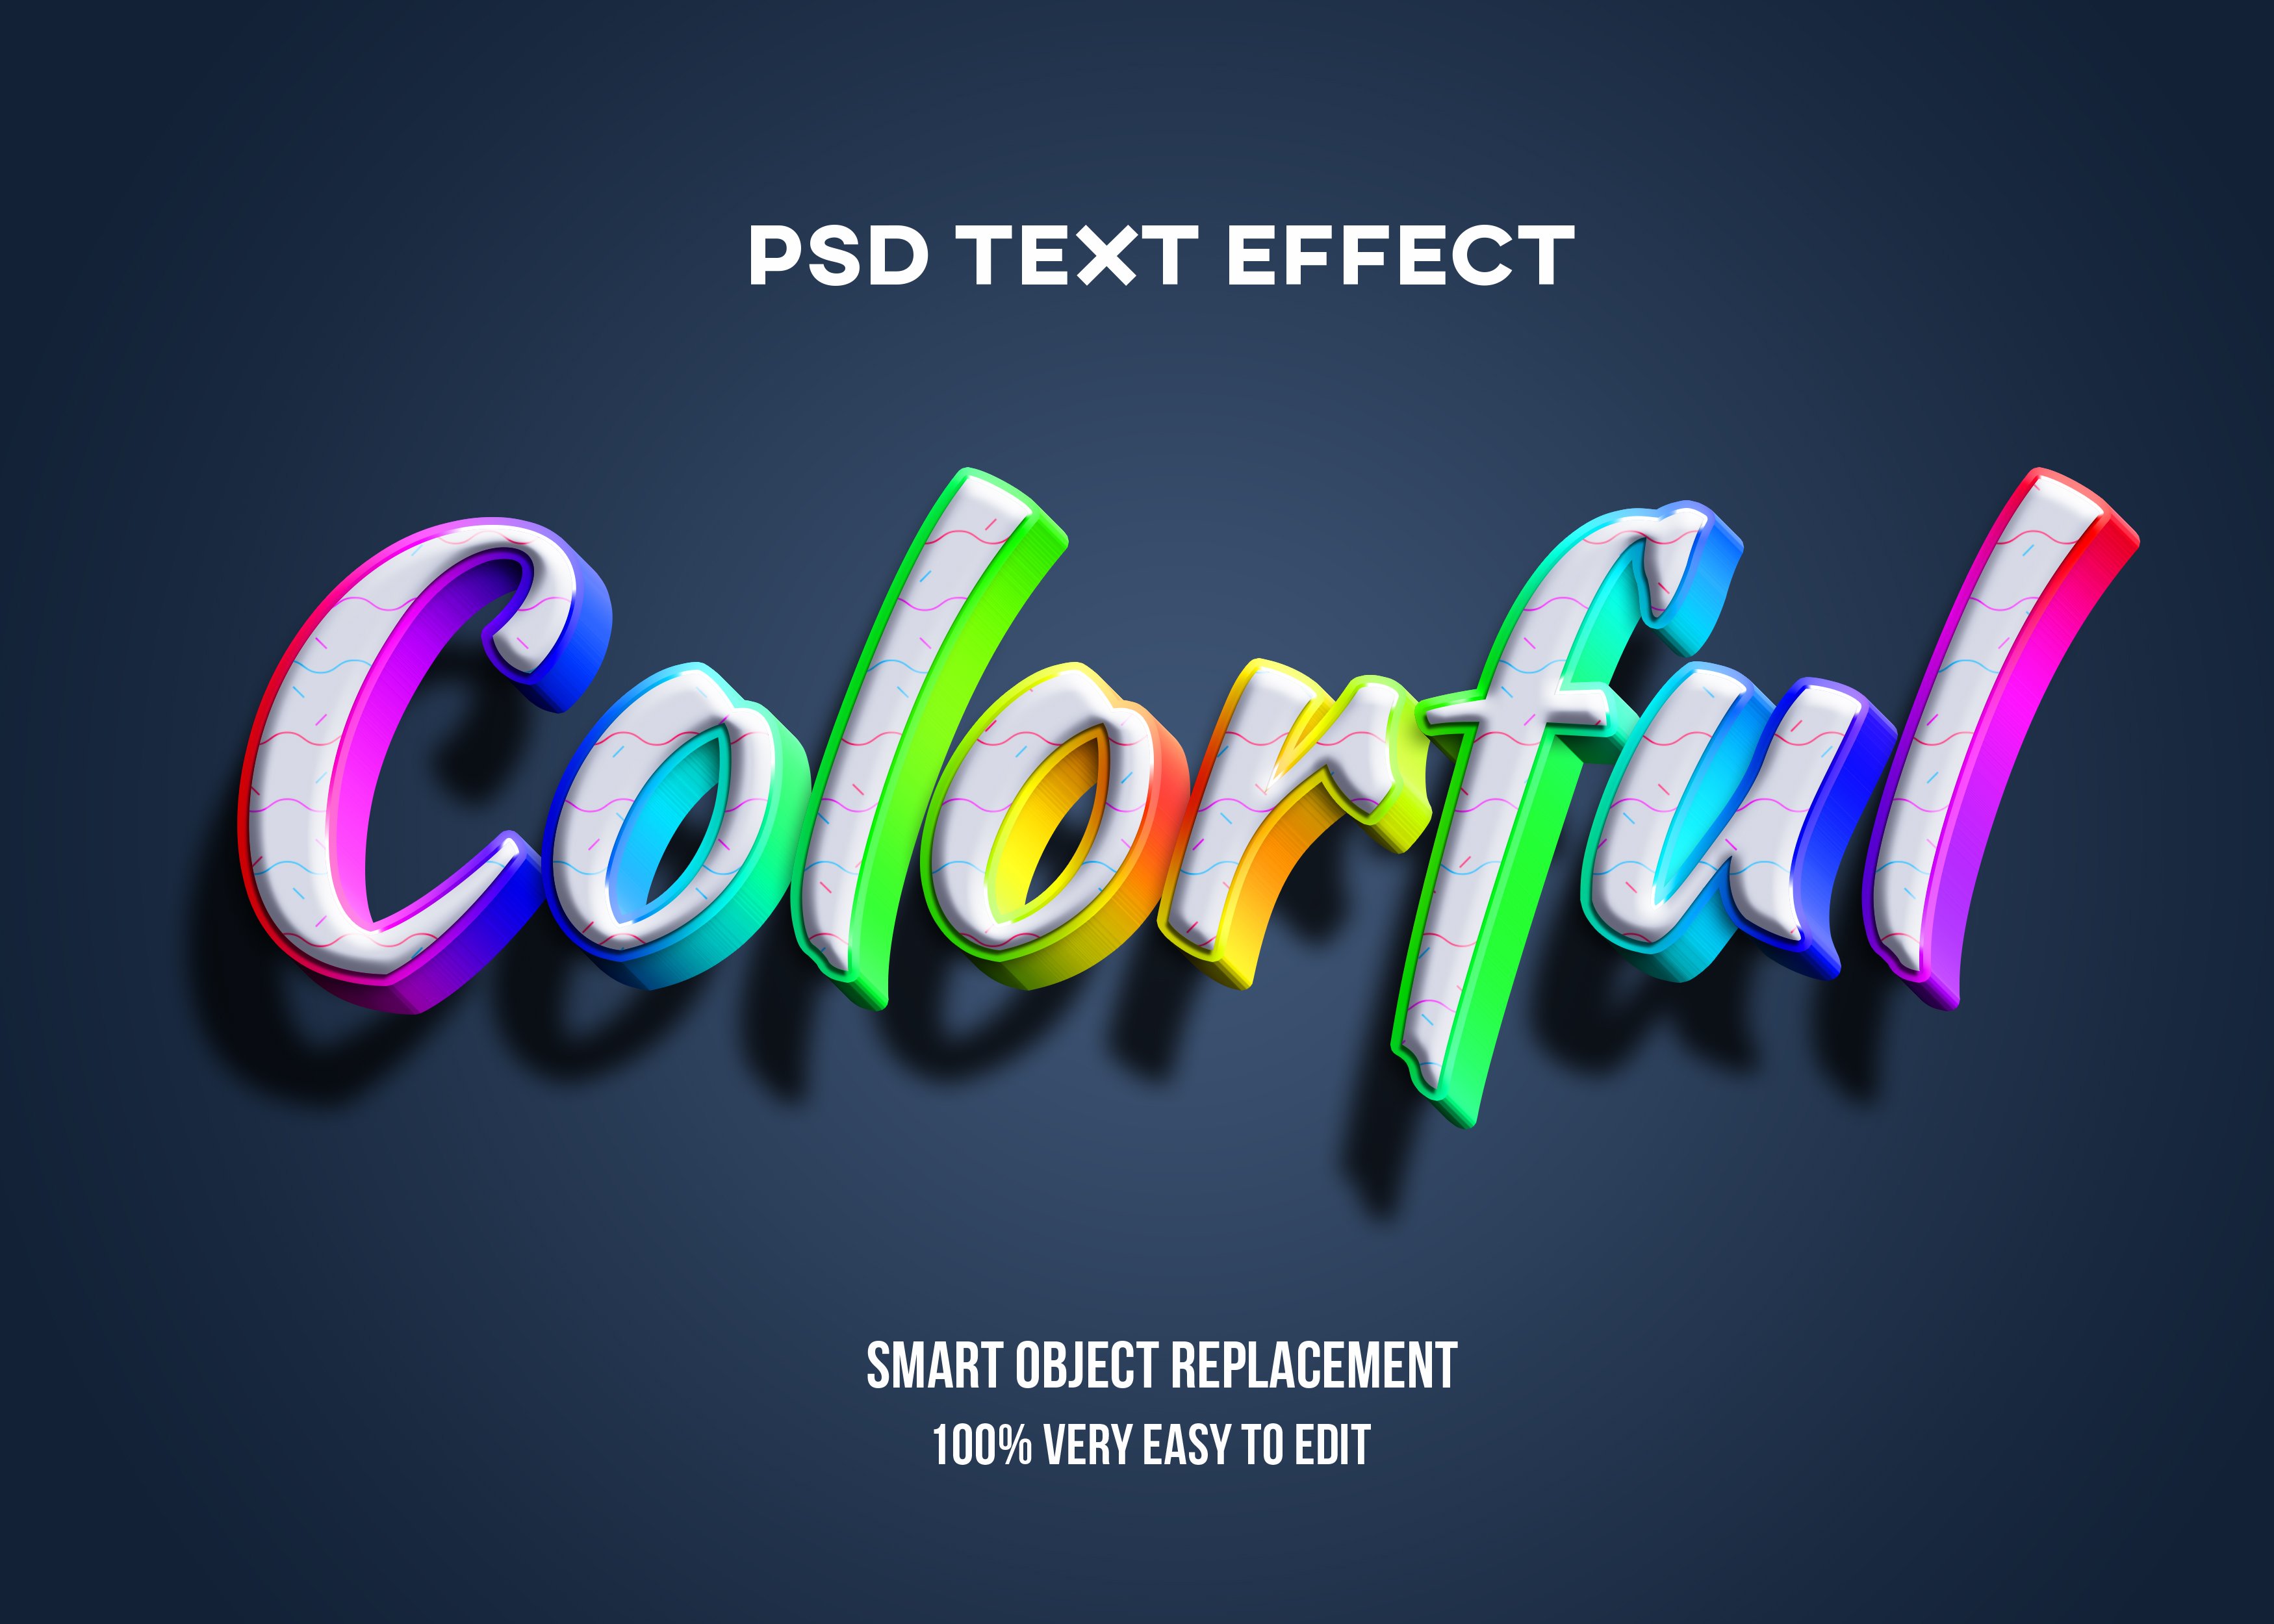 Colorful 3D Editable Text Effect Psdcover image.